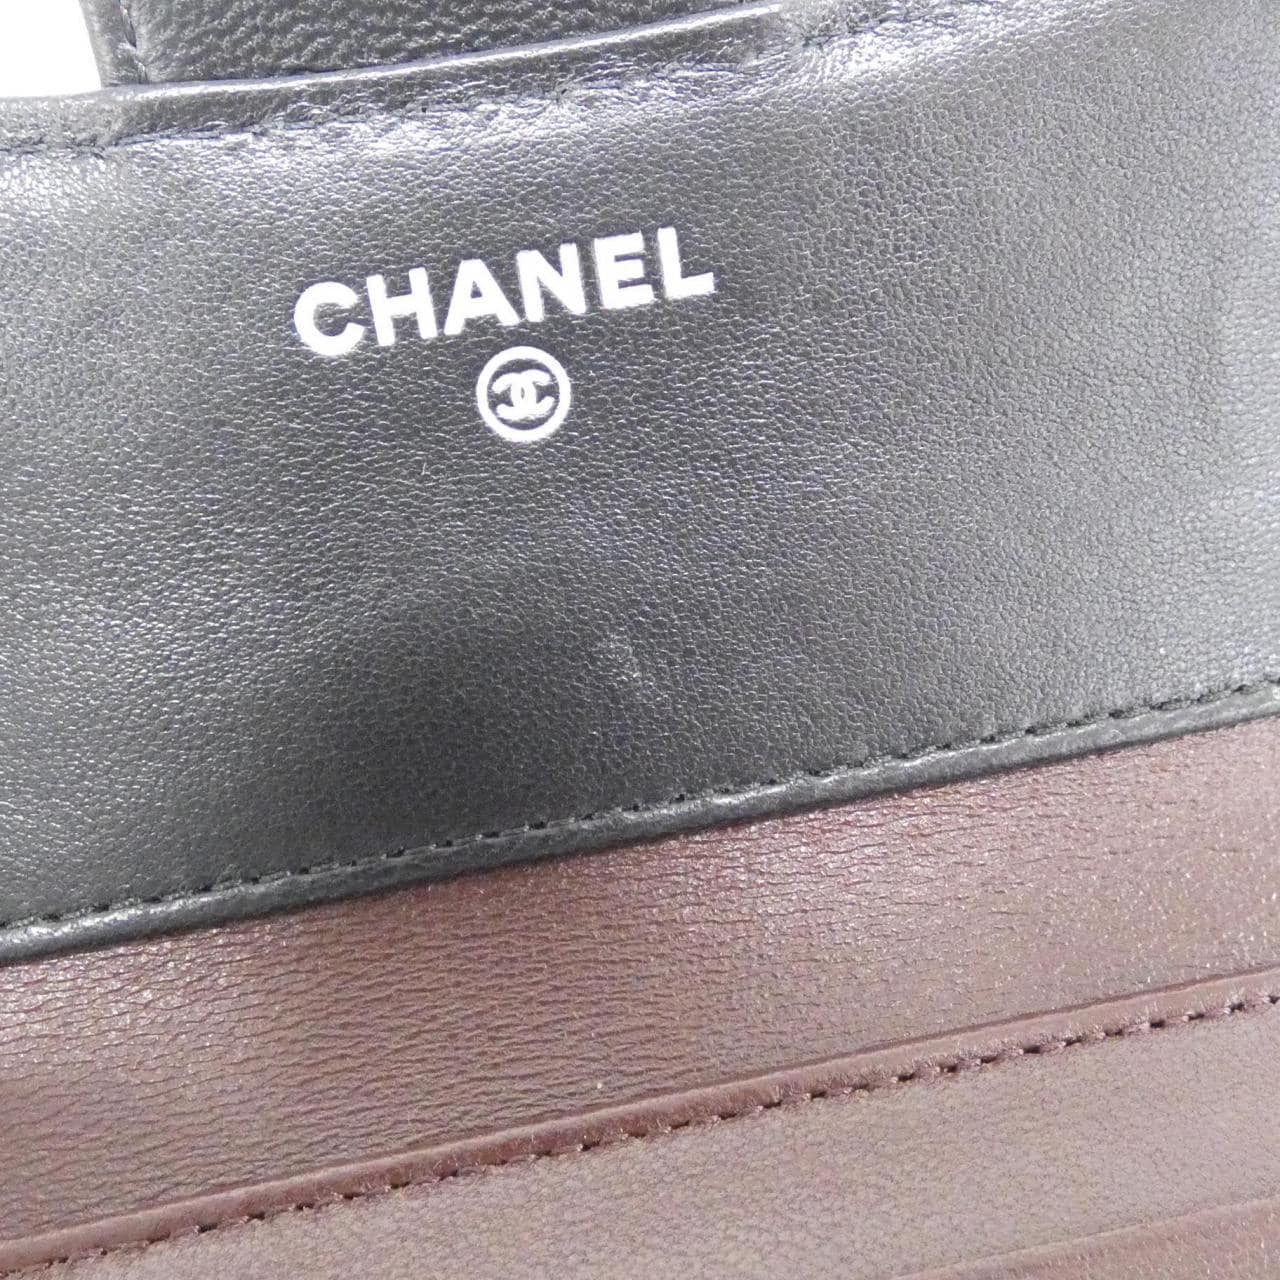 CHANEL Timeless Classic Line AP0231 Wallet